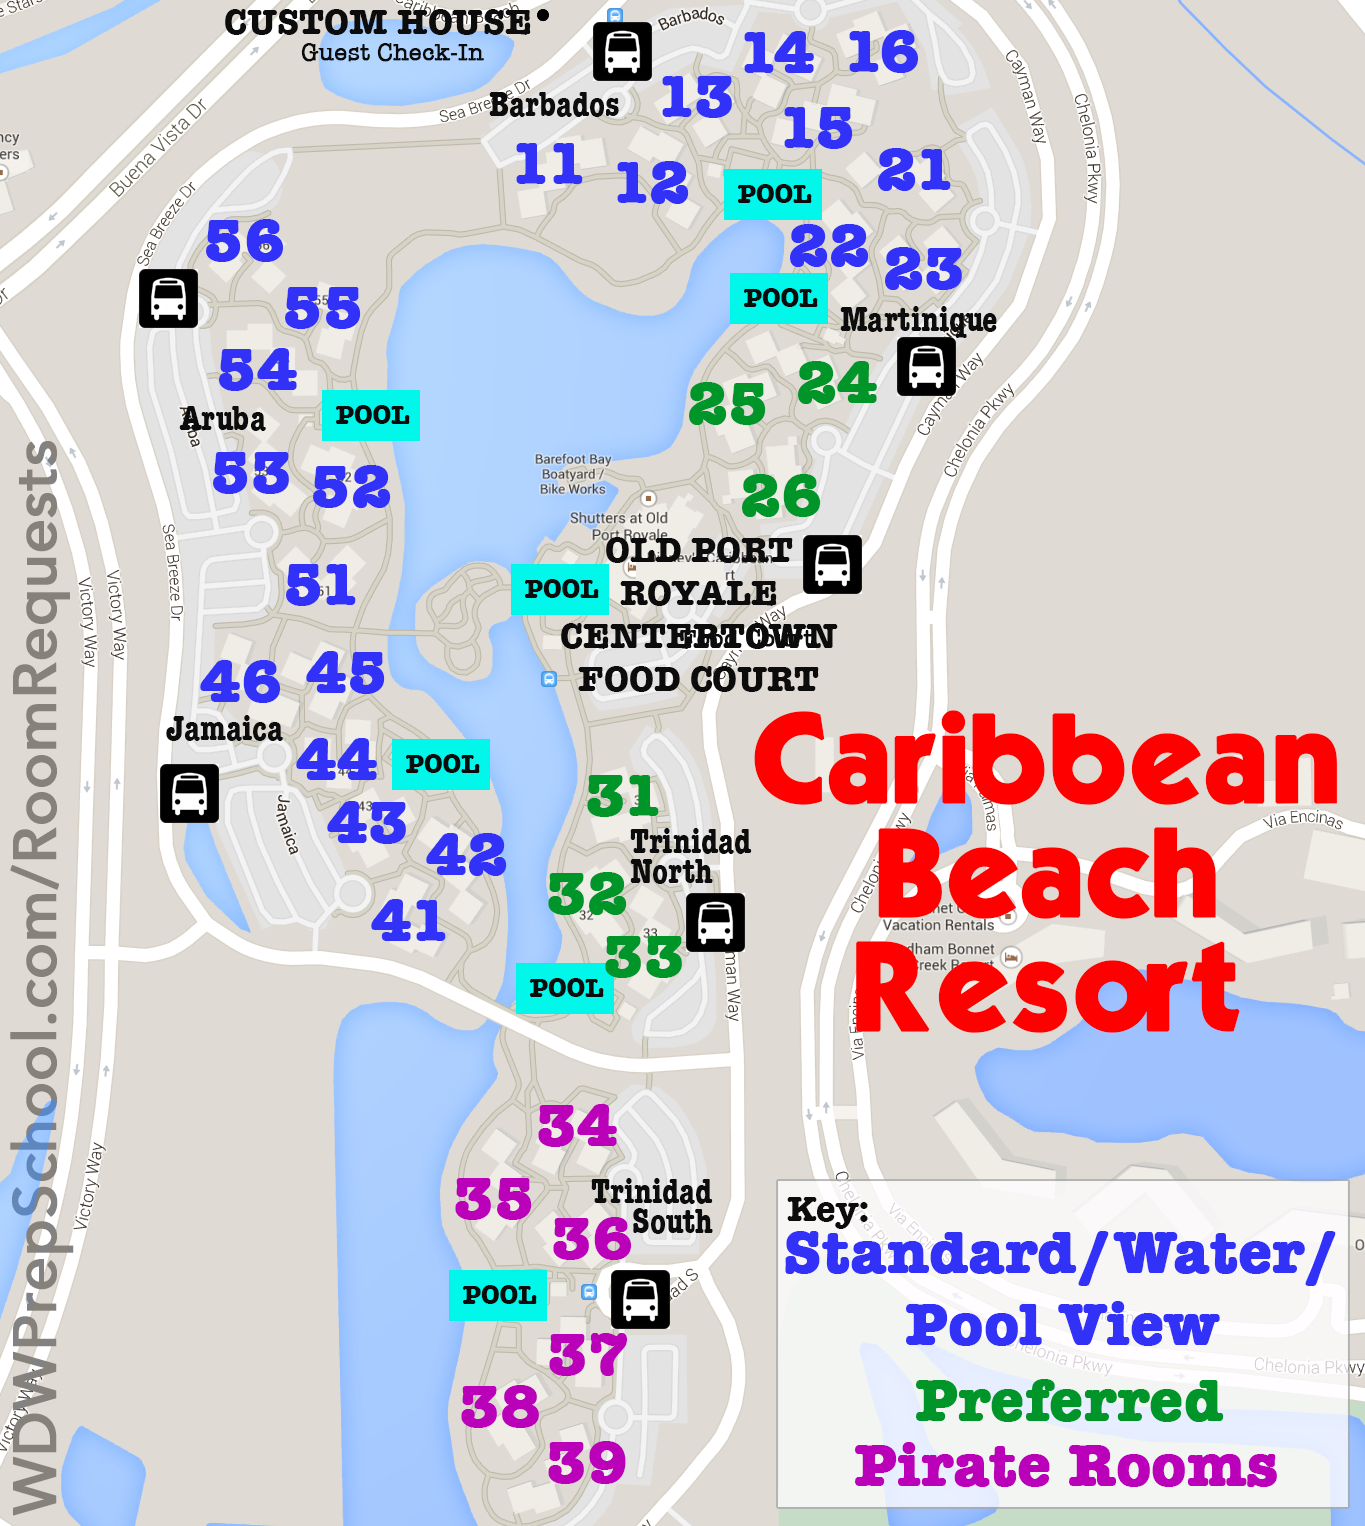 How To Get The Disney World Resort Room You Want Disney Caribbean 